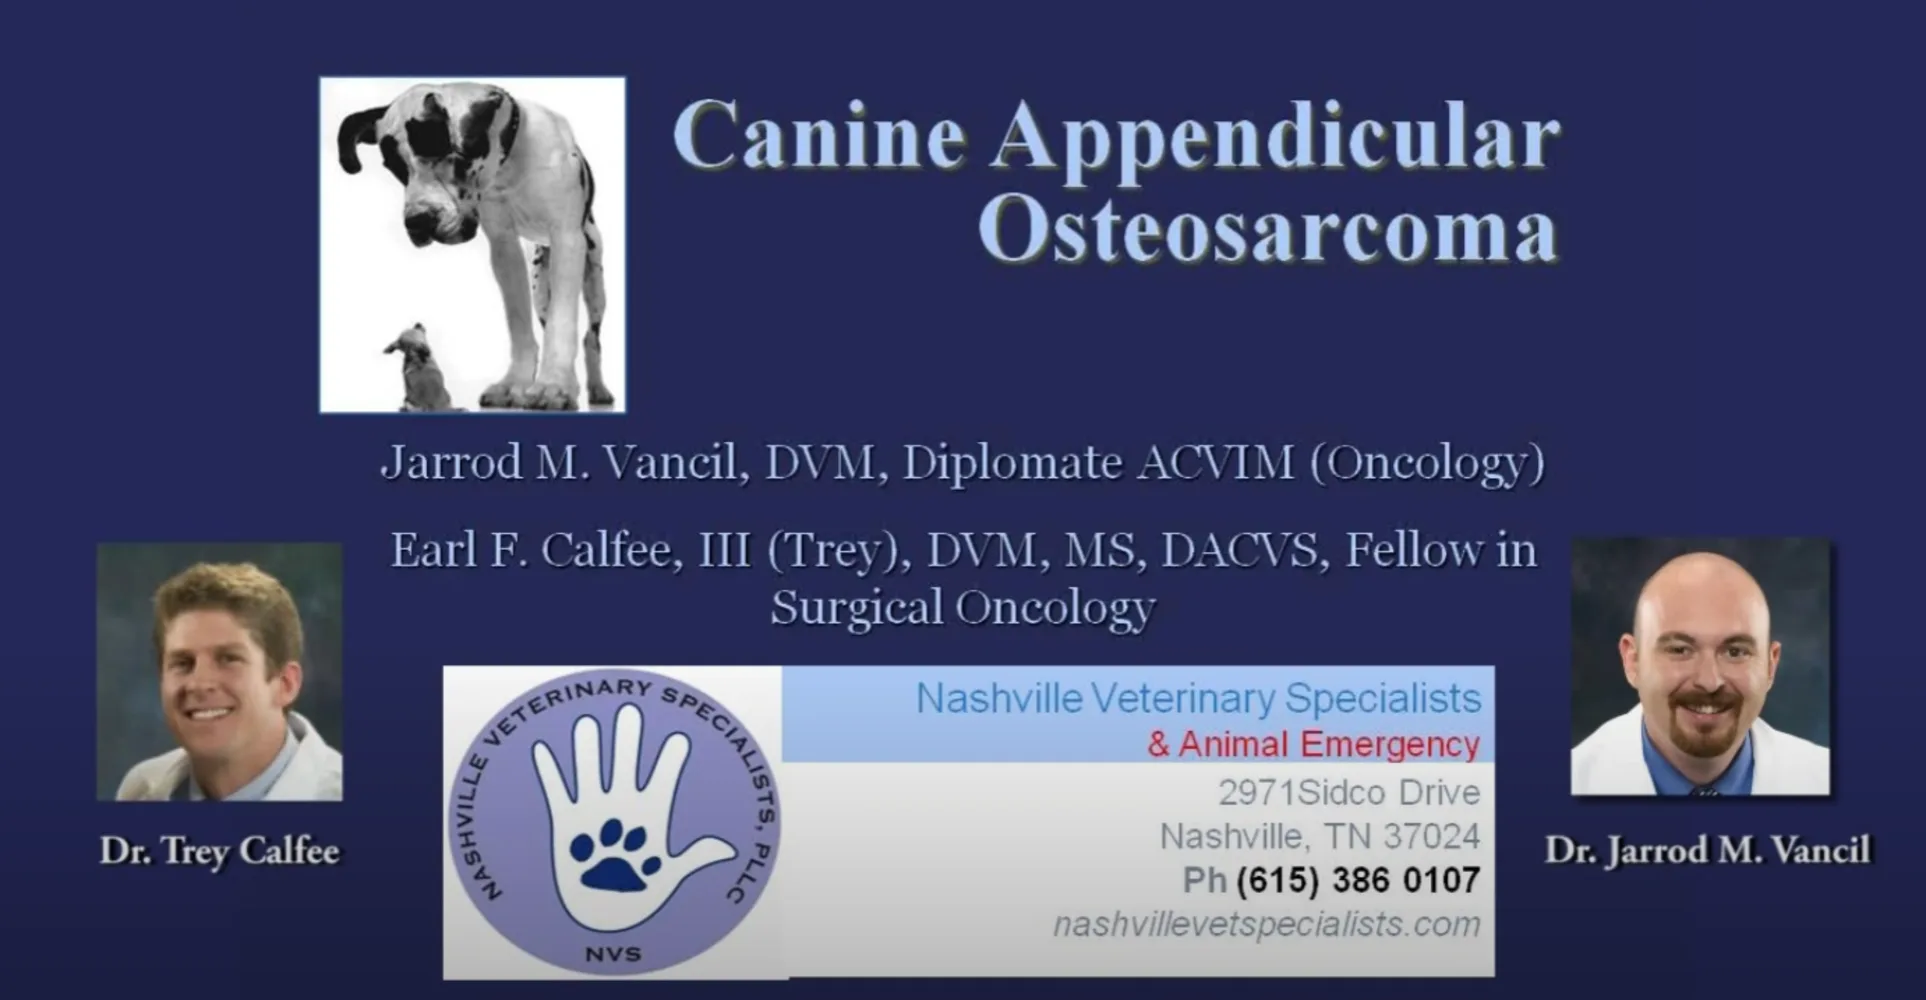 Canine Appendicular Osteosarcoma Video at NVS